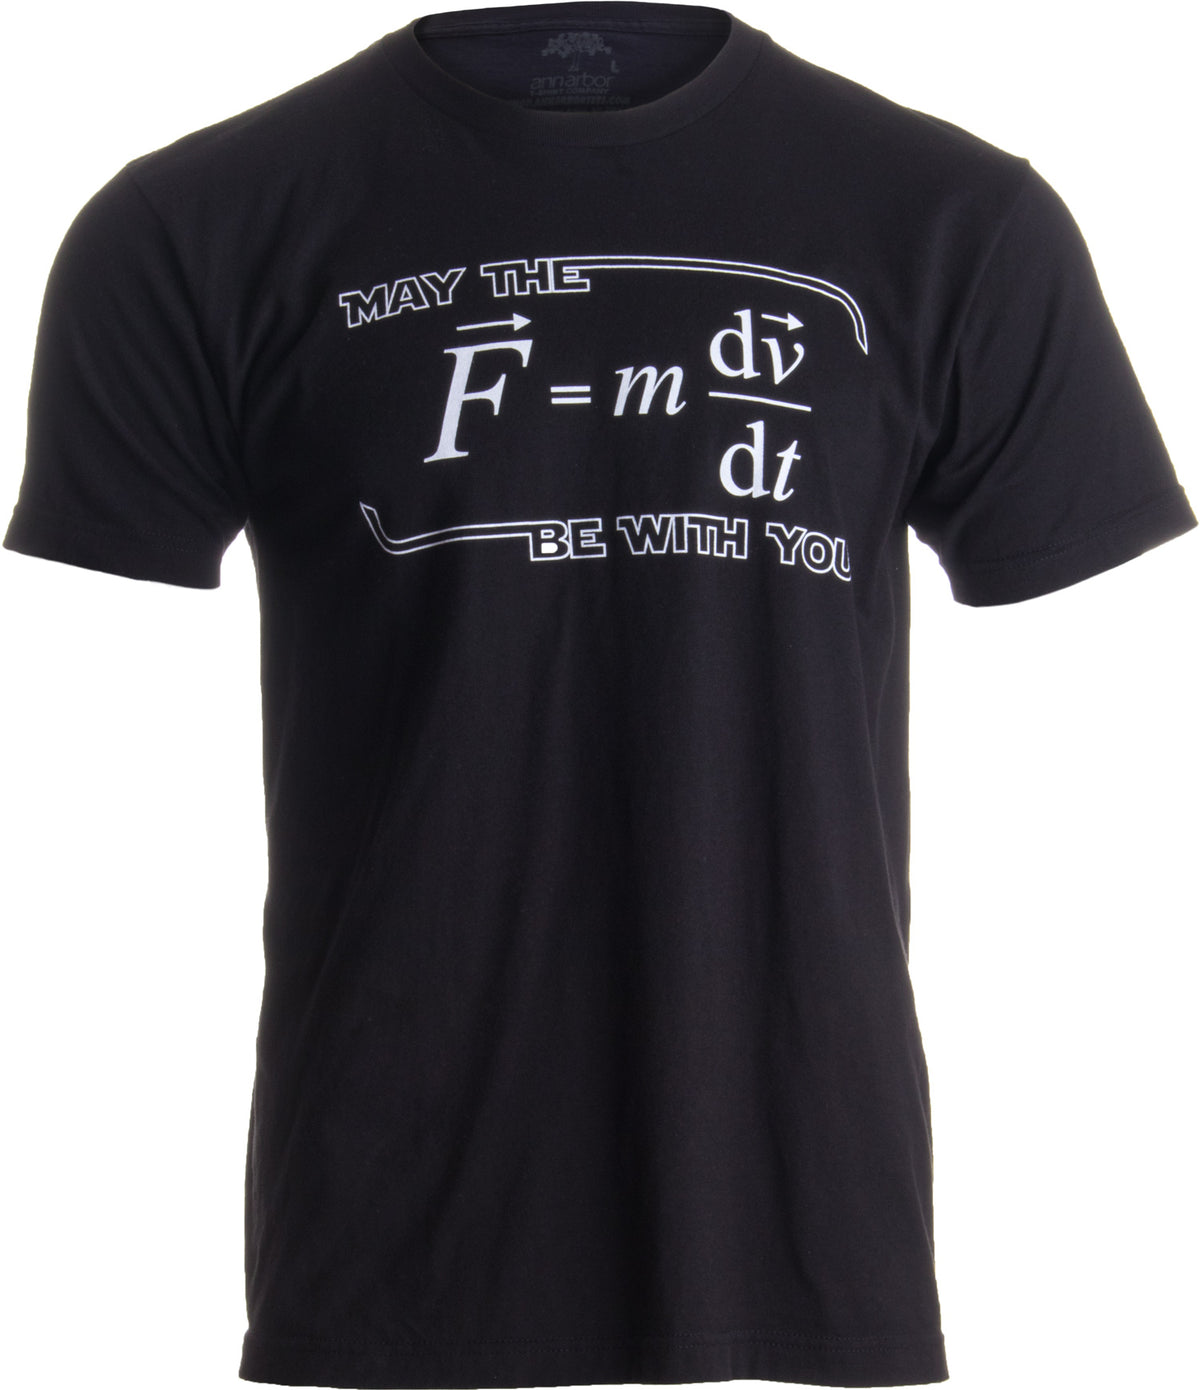 May the (F=m*dv/dt) Be with You  Funny Physics Science Unisex T-shirt –  Ann Arbor T-shirt Company